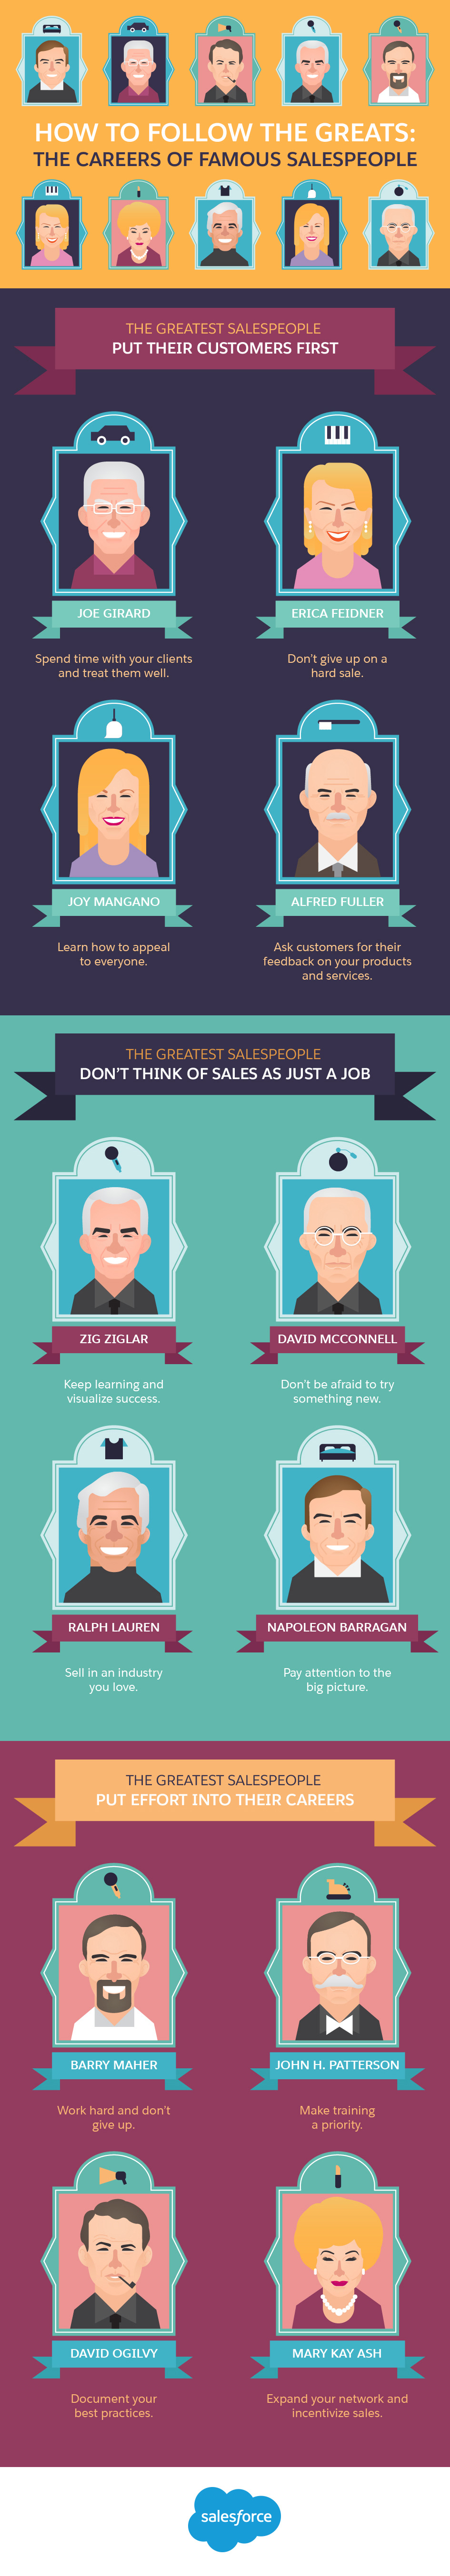 How to Follow the Greats: The Careers of Famous Salespeople